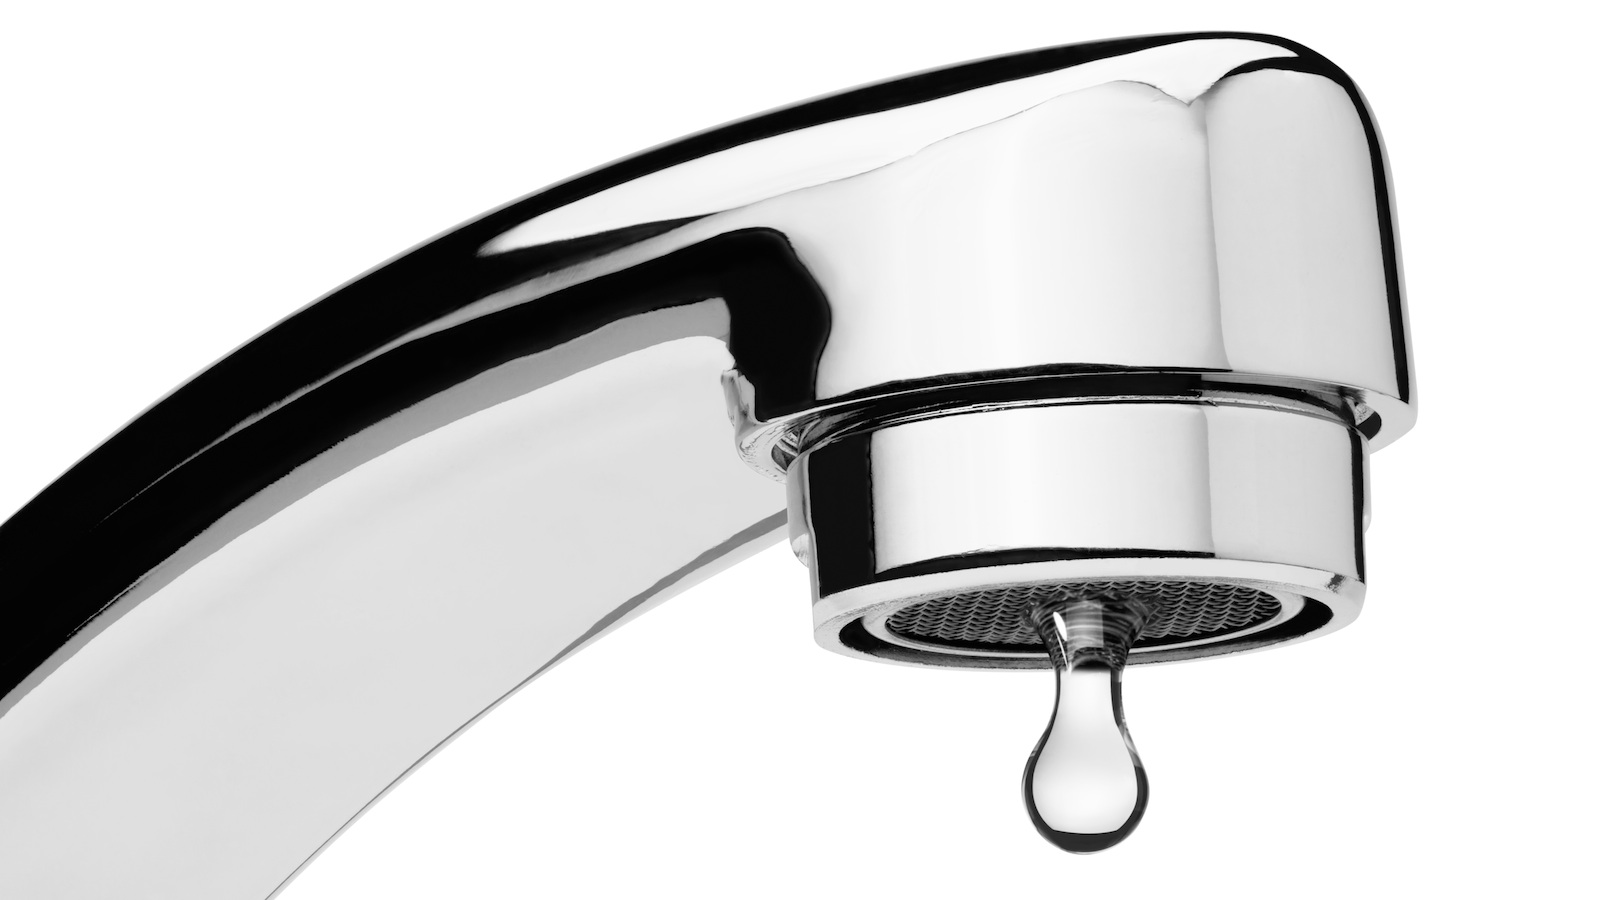 Water tap with drop, isolated on the white background, clipping path included.